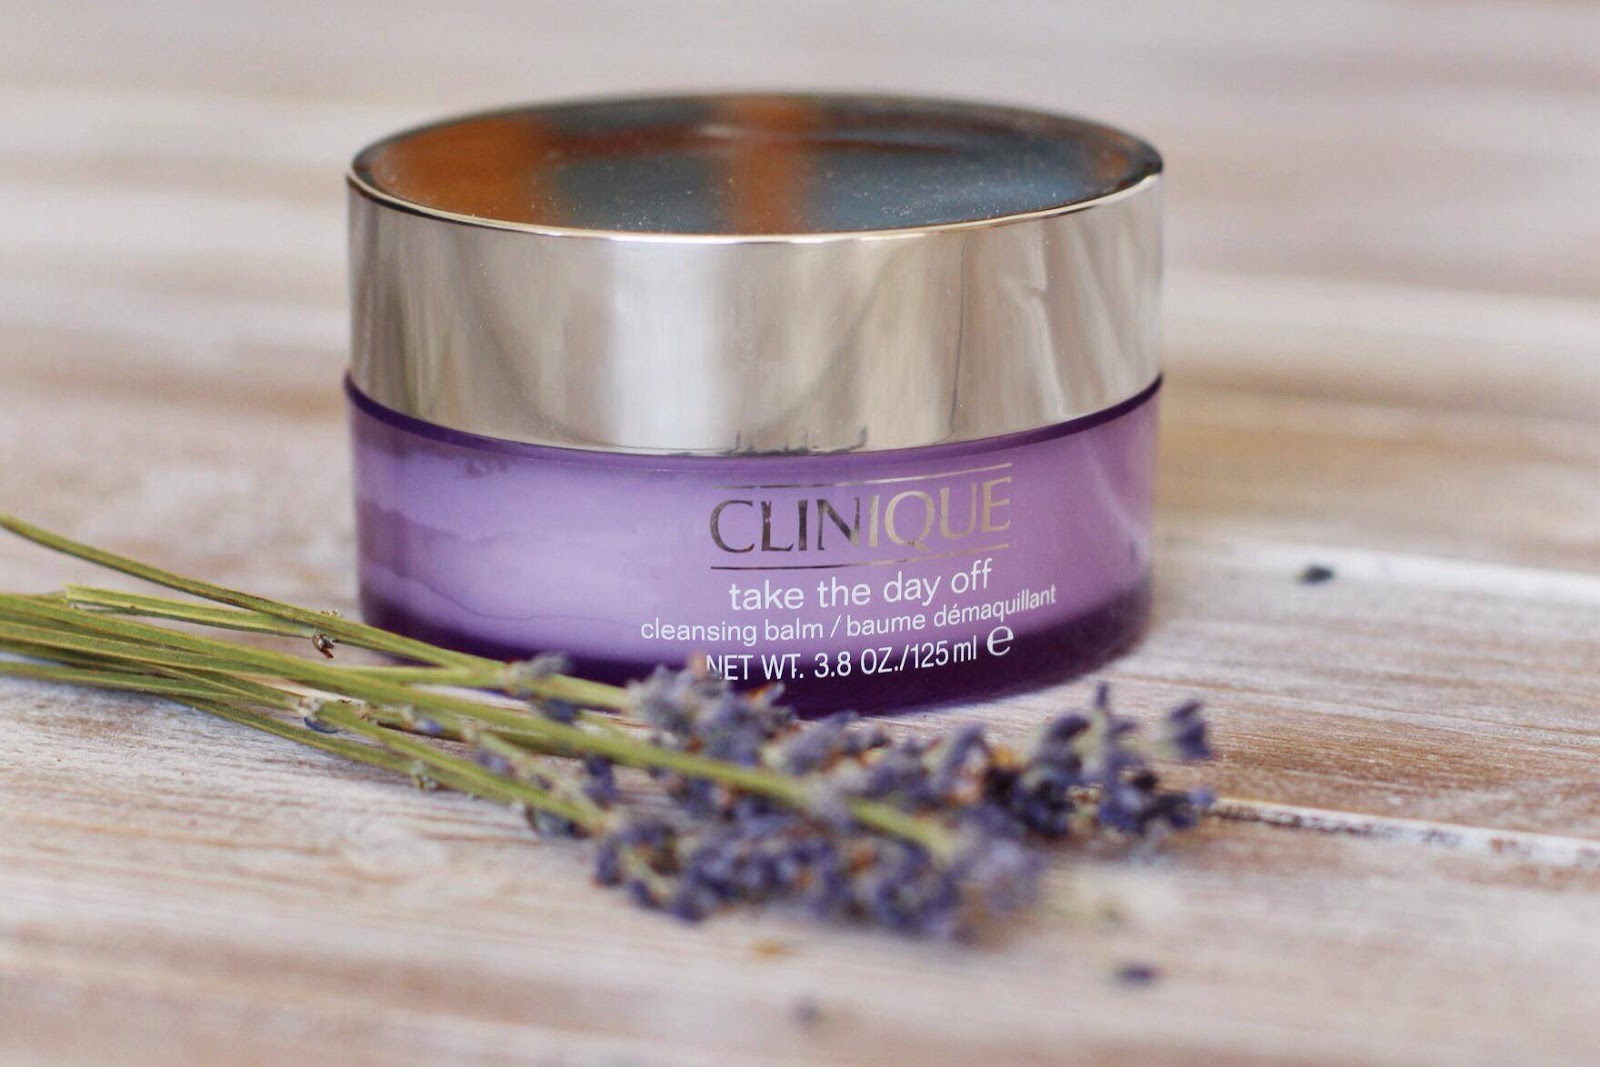 Take the day off cleansing. Clinique take the Day off Cleansing Balm. Clinique take the Day off бальзам. Clinique New take the Day off Charcoal Cleansing Balm. Фото Clinique take the Day off.